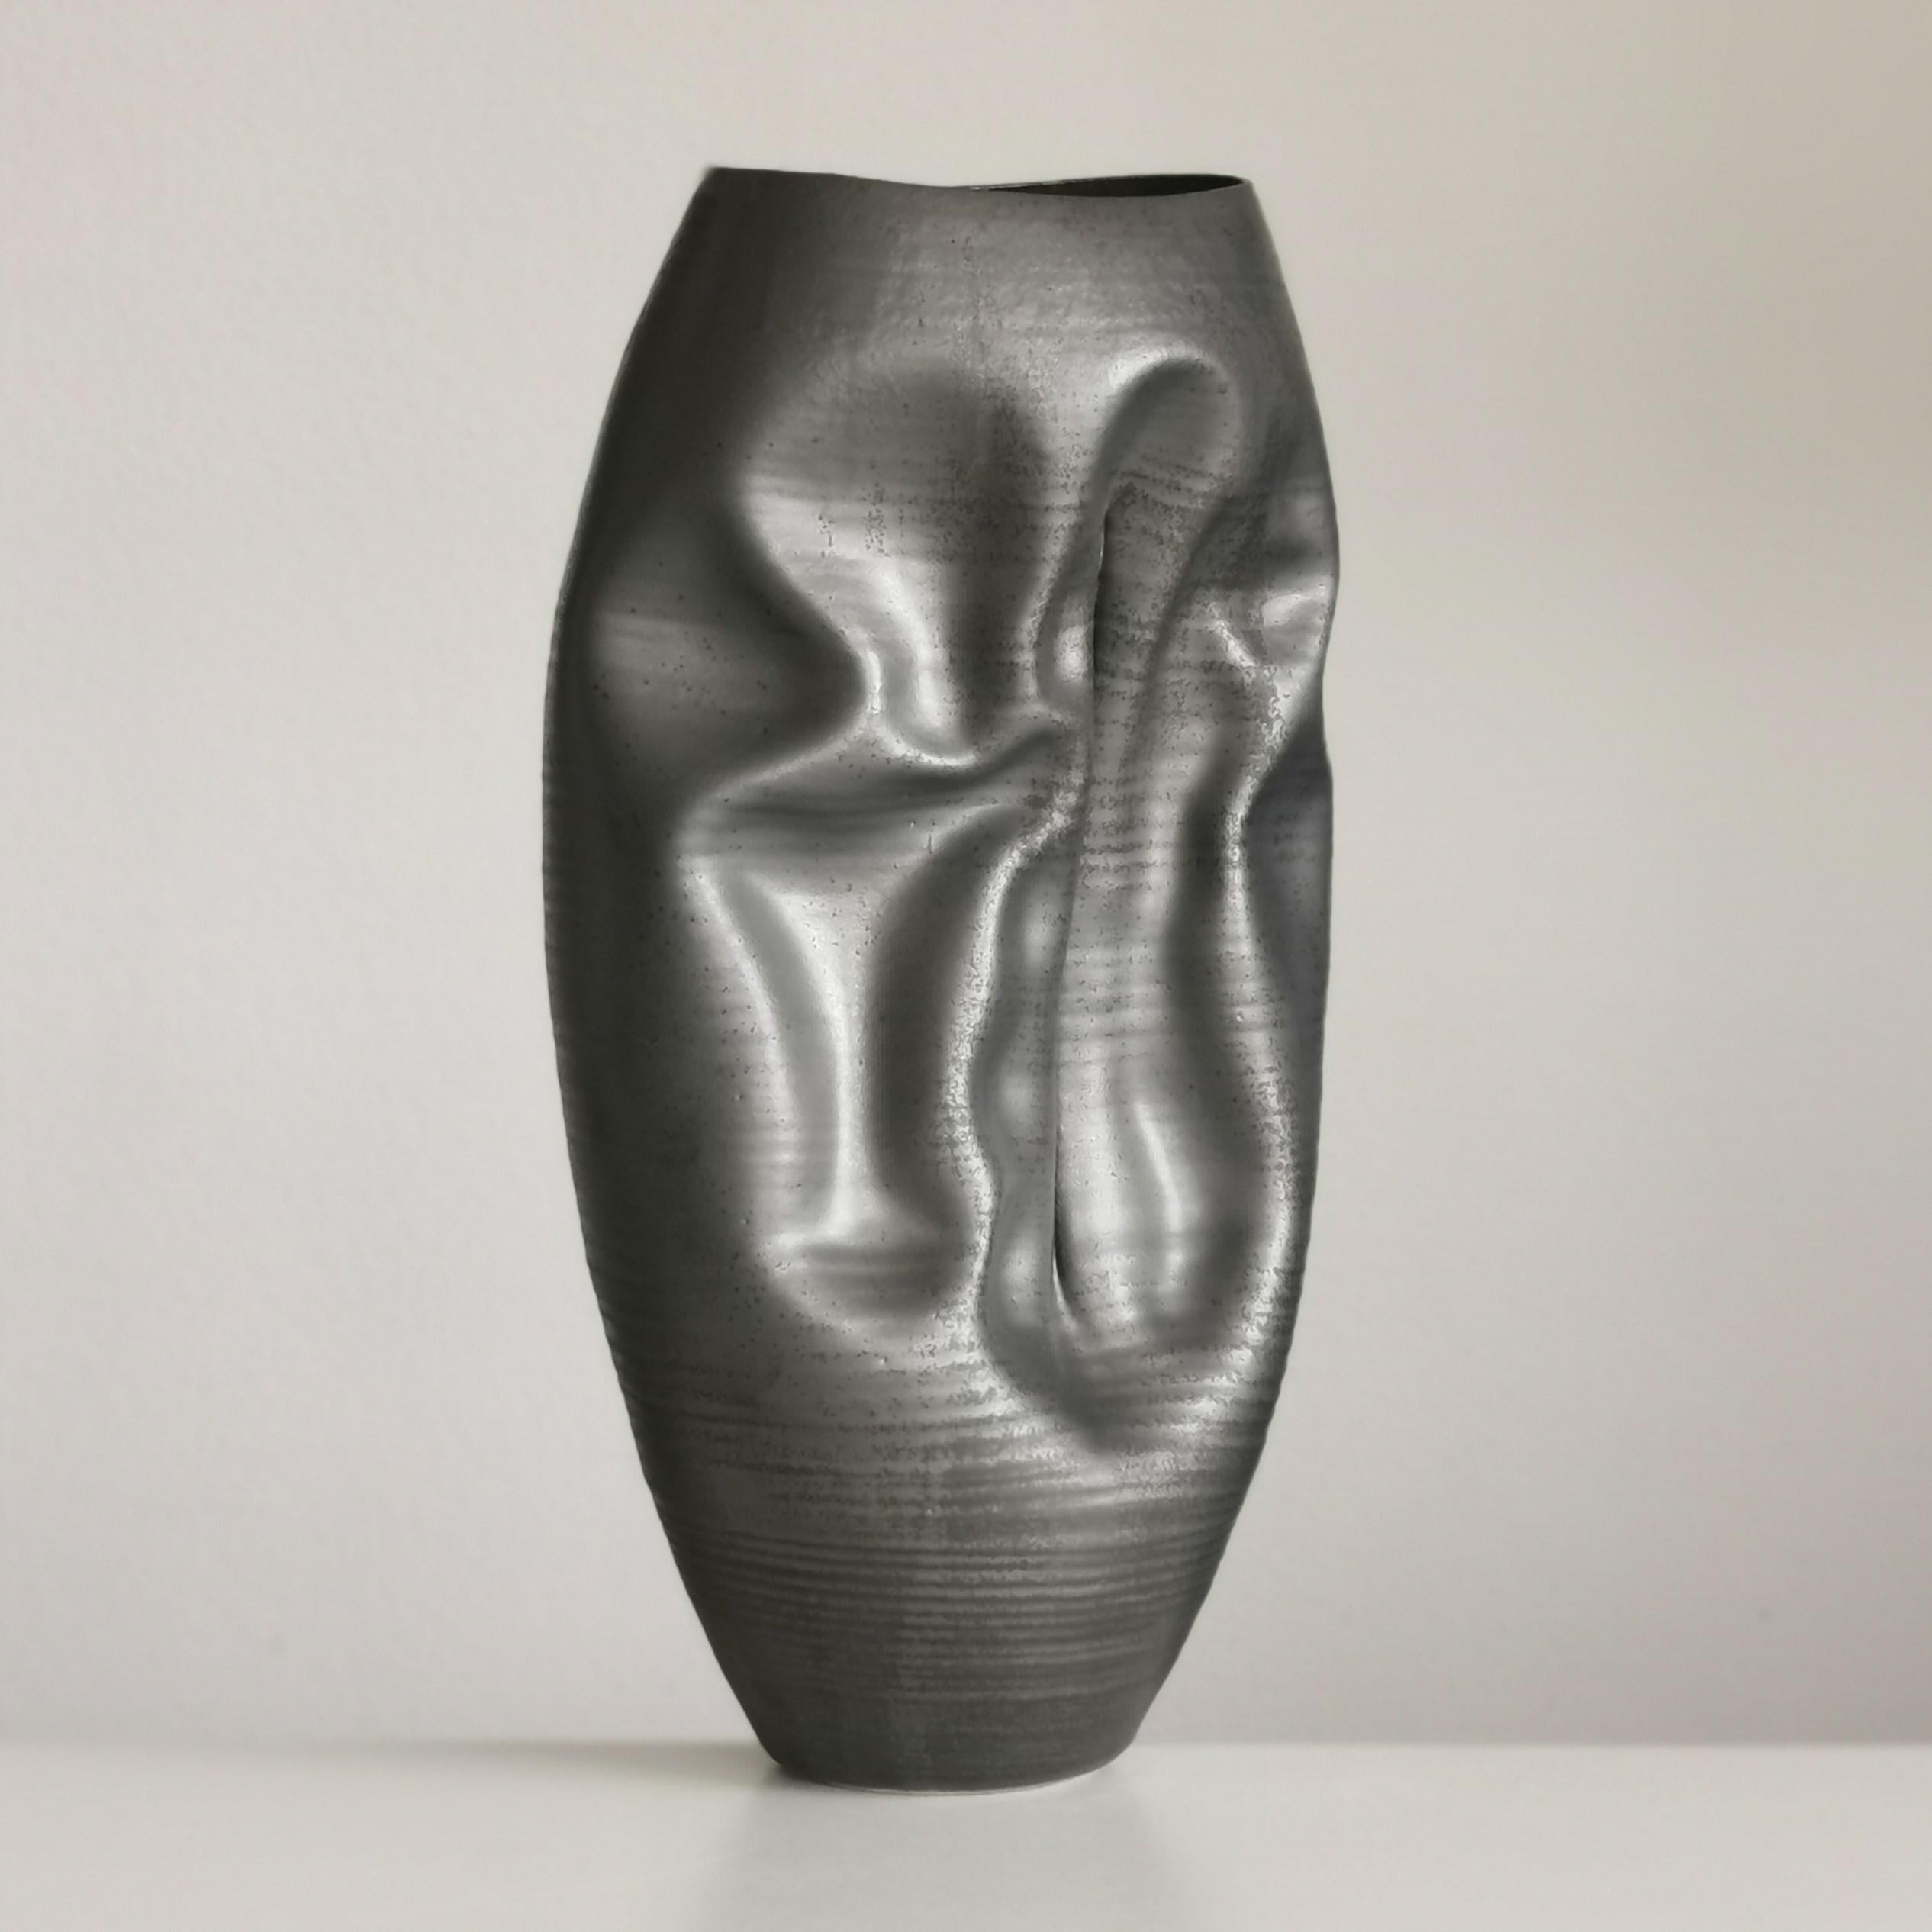 Hand-Crafted Undulating Crumpled Form No 70, a Ceramic Vessel by Nicholas Arroyave-Portela For Sale